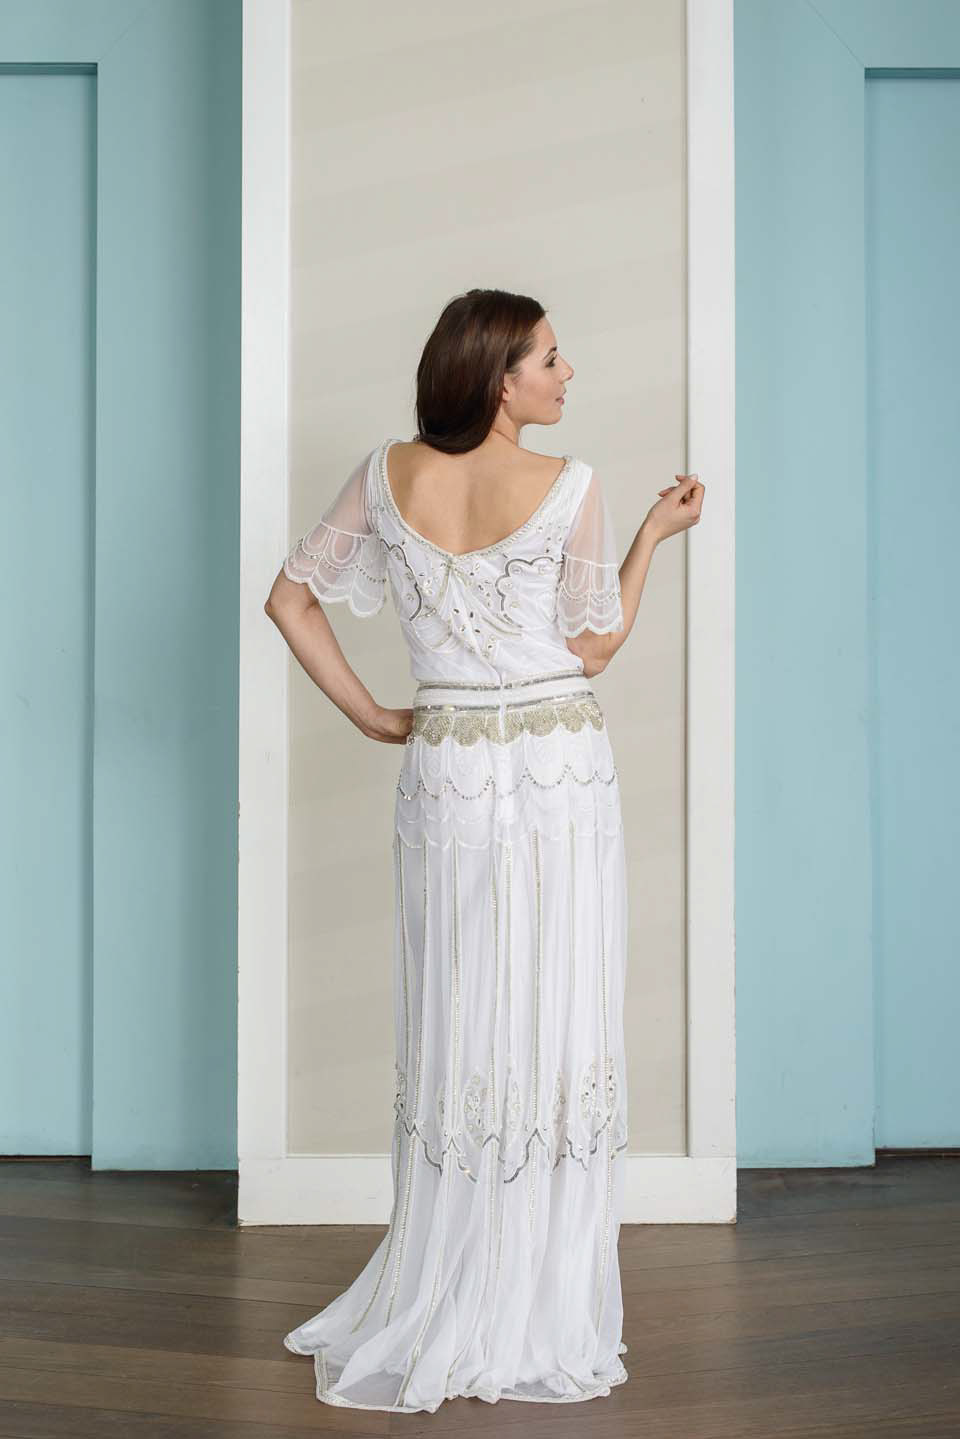 1920s Inspired Wedding Dresses
 Vicky Rowe A Debut Collection of 1920s and 1930s Inspired